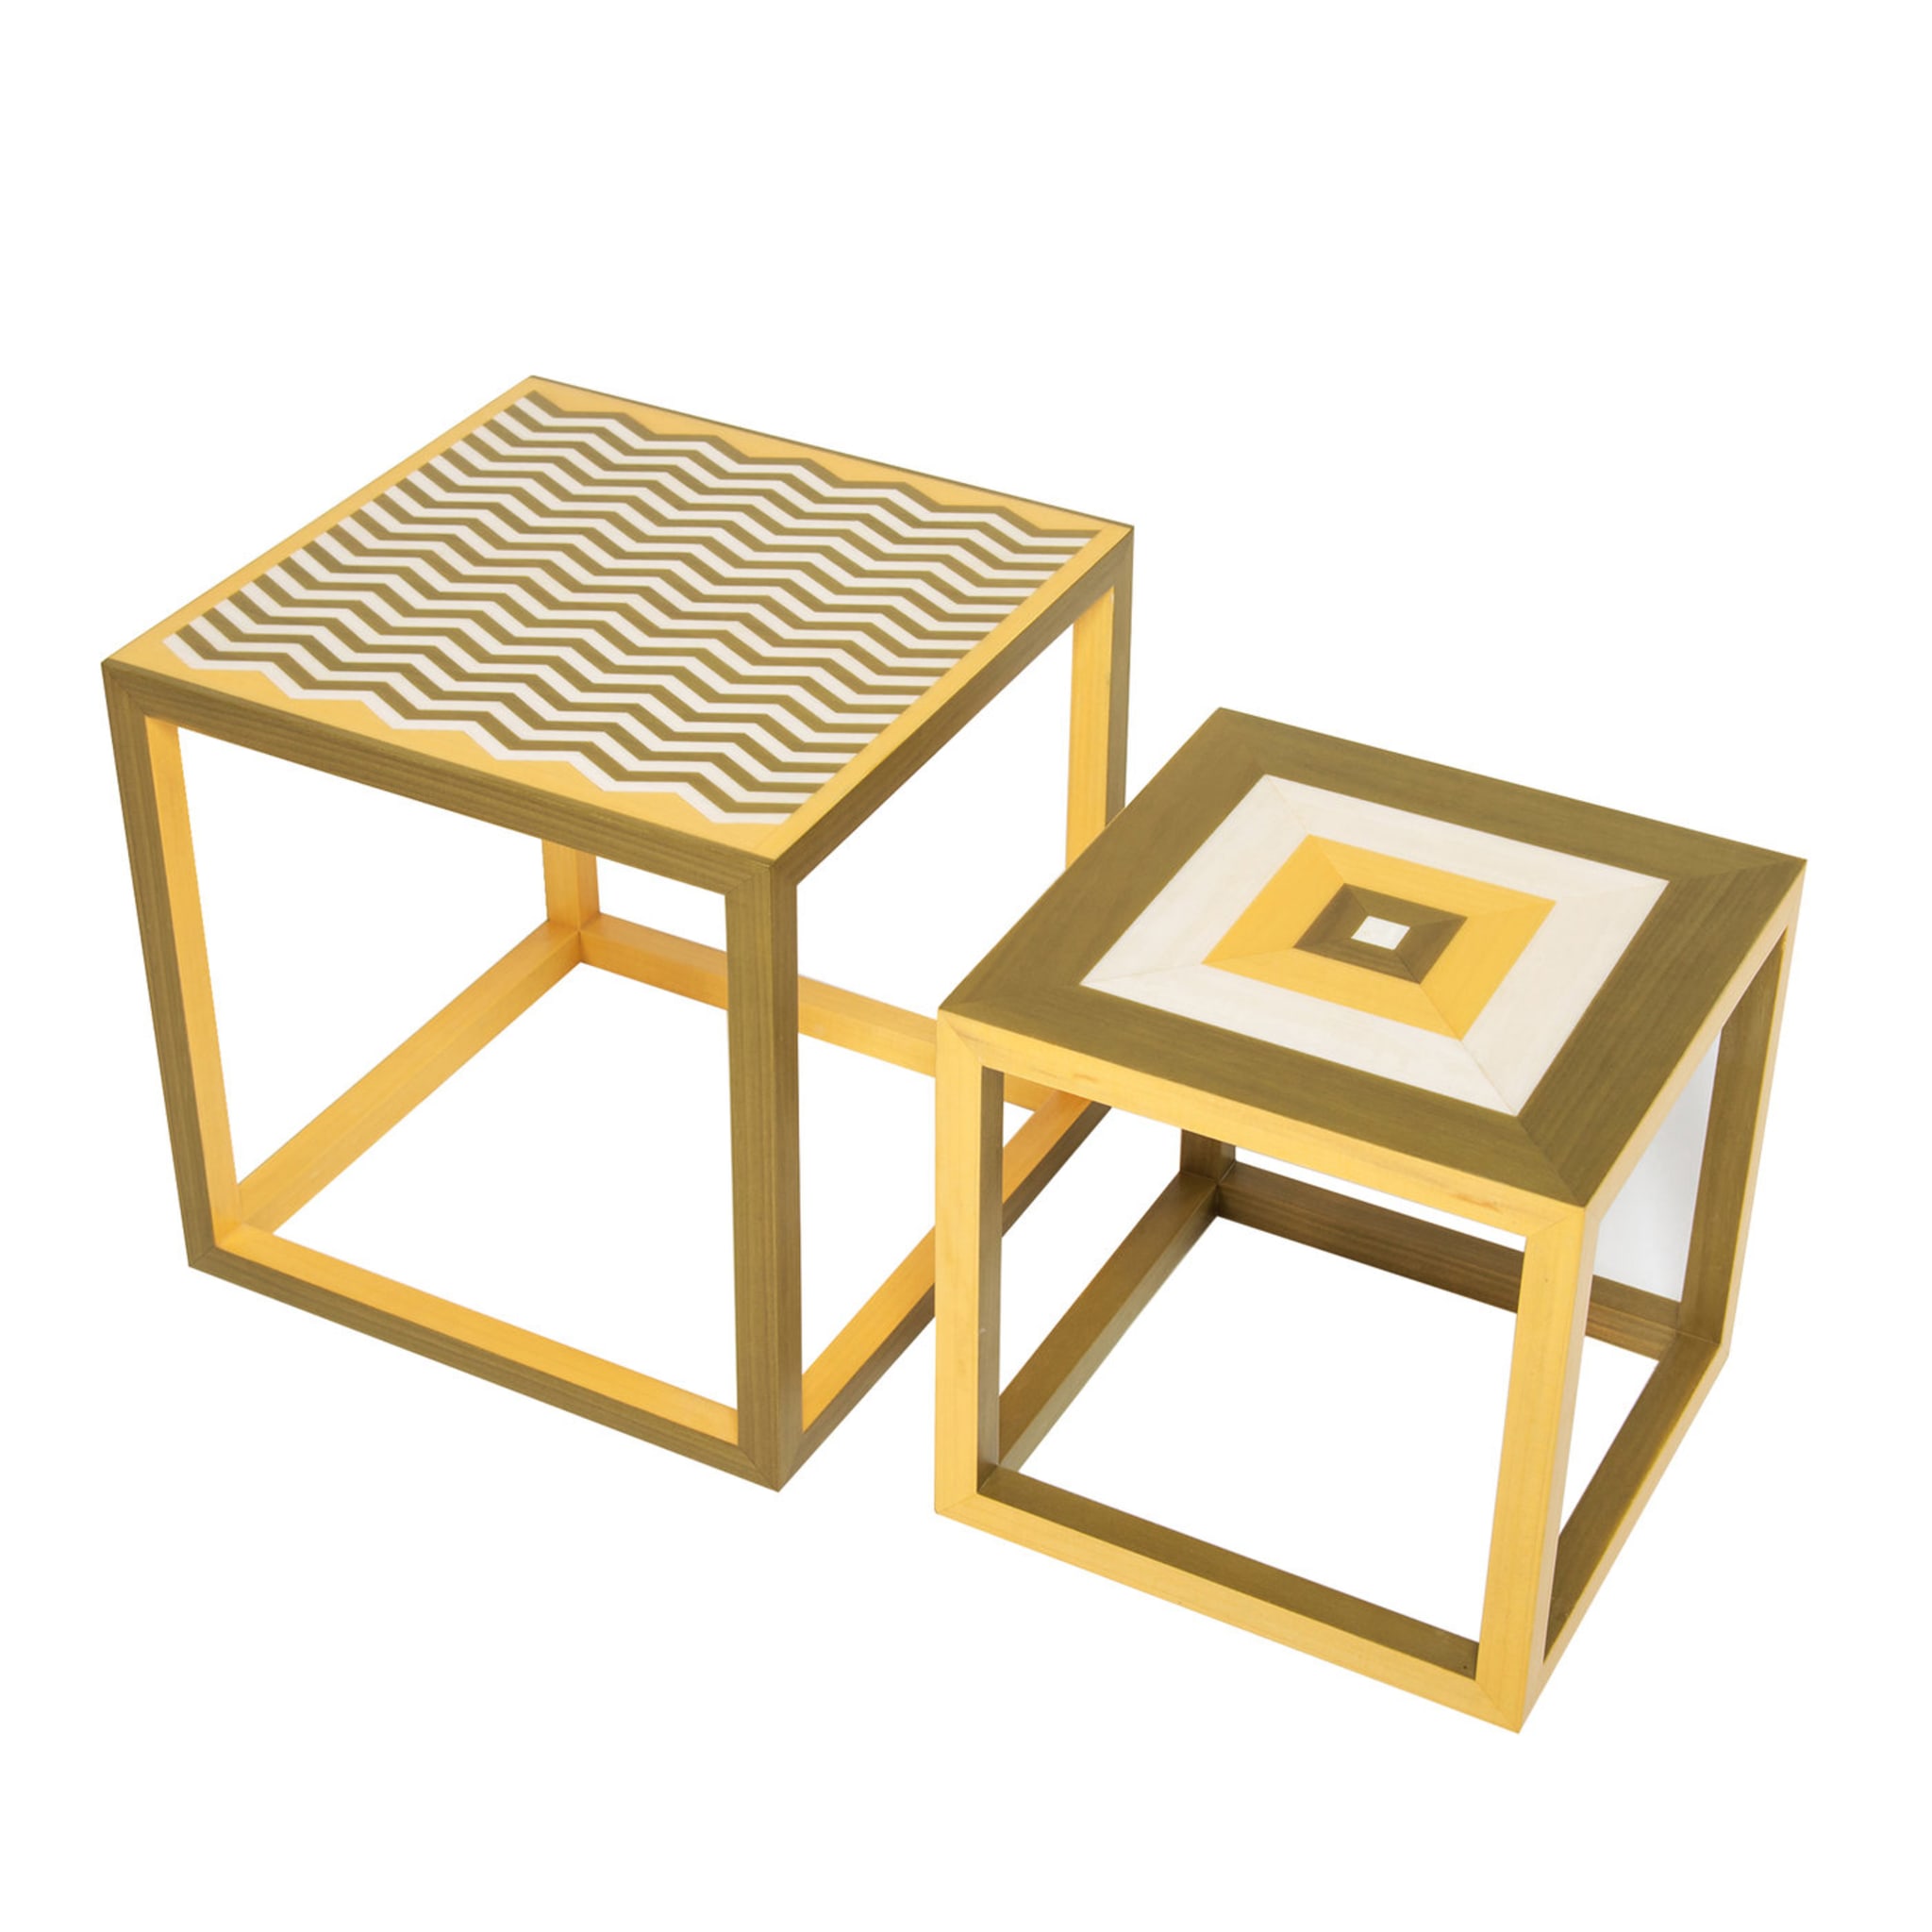 Partenope Yellow Squares Set of 2 Nesting Tables - Main view